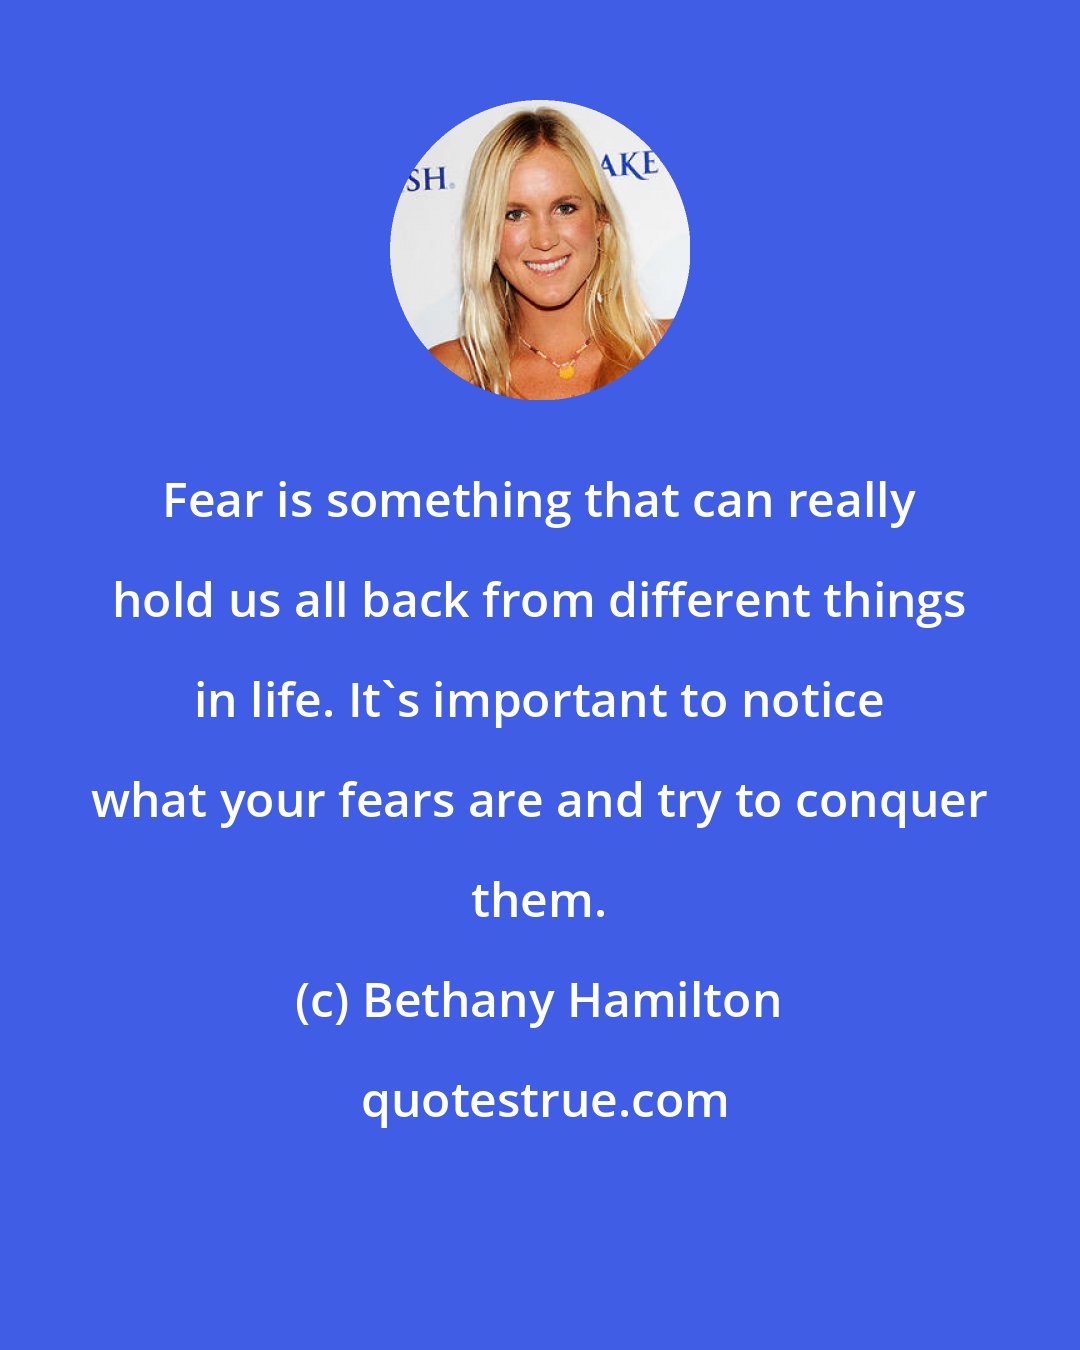 Bethany Hamilton: Fear is something that can really hold us all back from different things in life. It's important to notice what your fears are and try to conquer them.